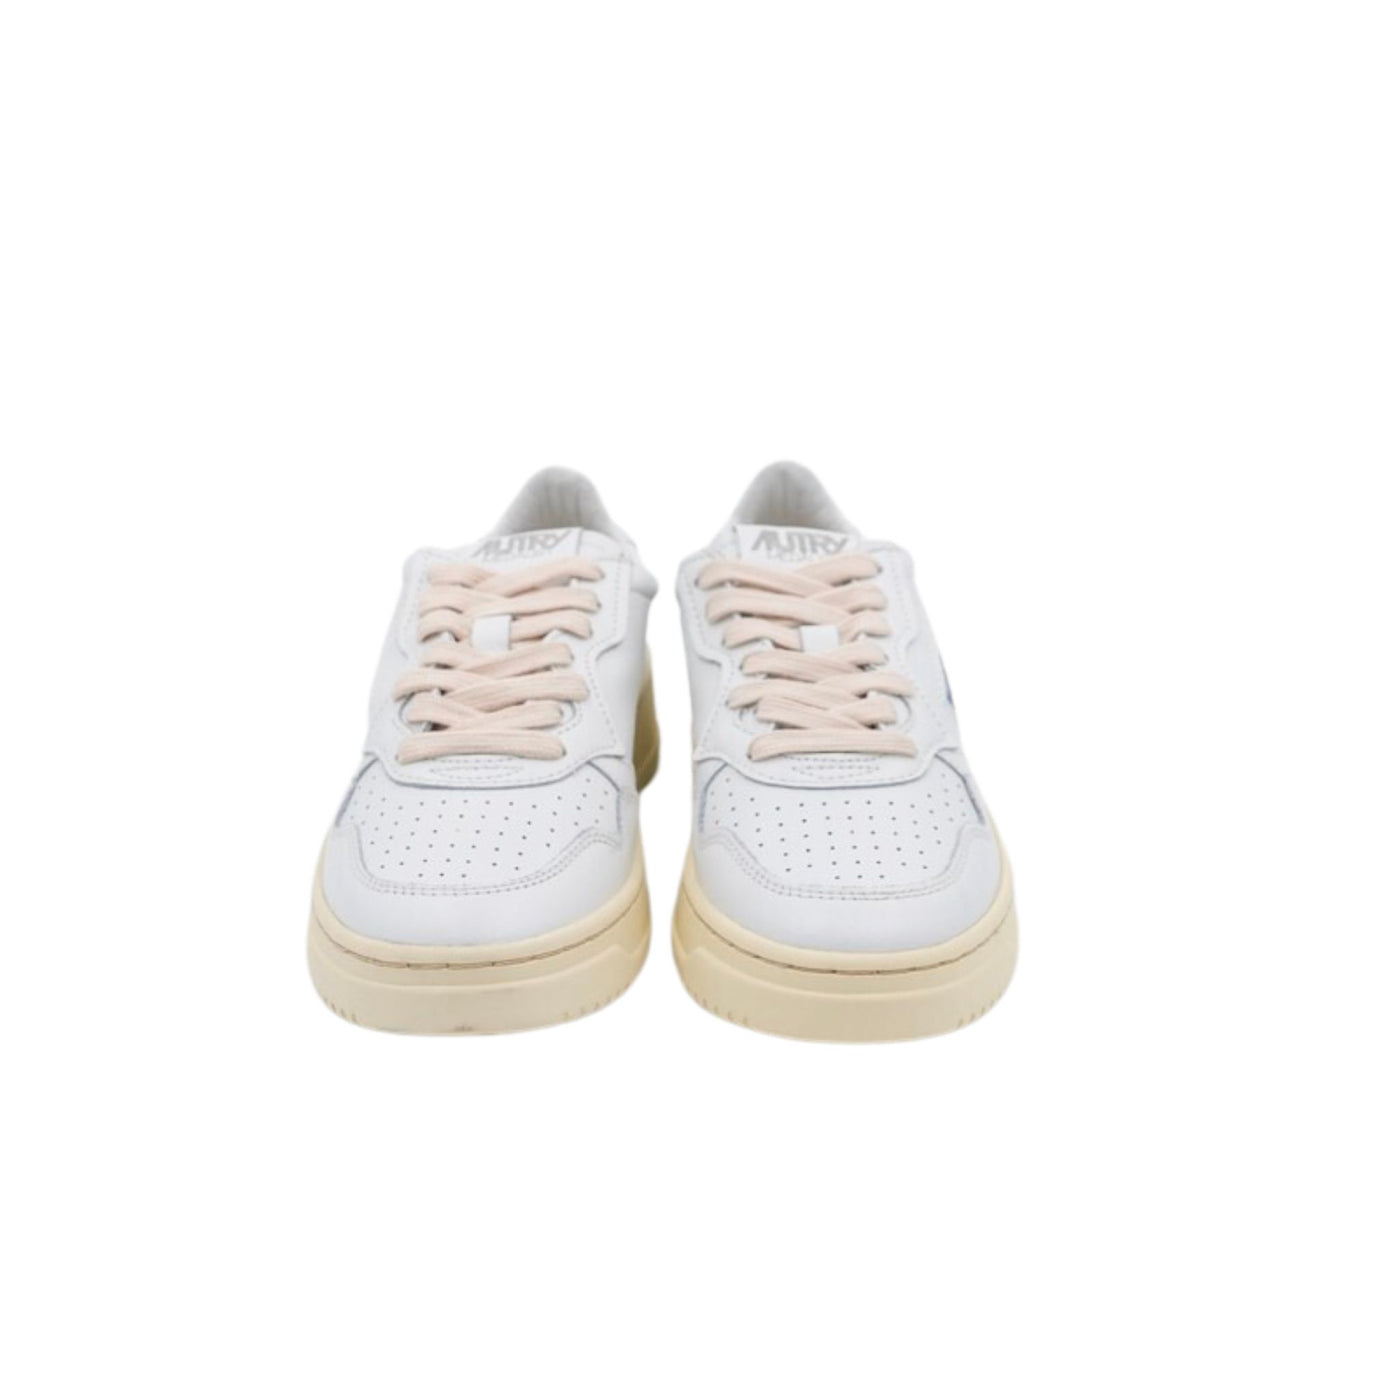 Sneakers Donna basse LL15 bianco